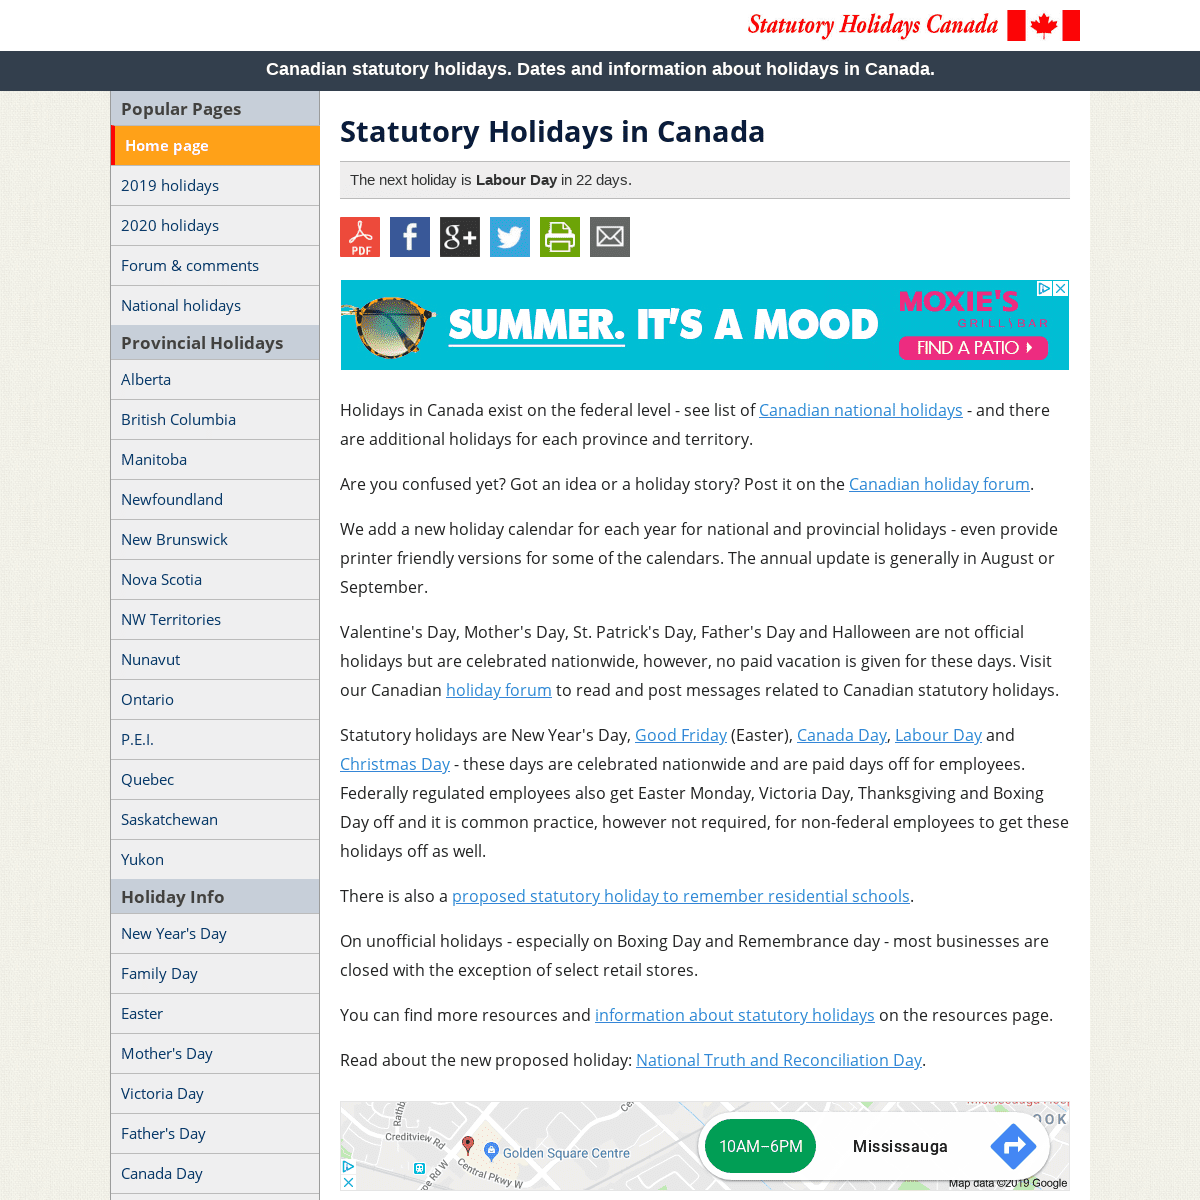 Statutory holidays in Canada both national and provincial.